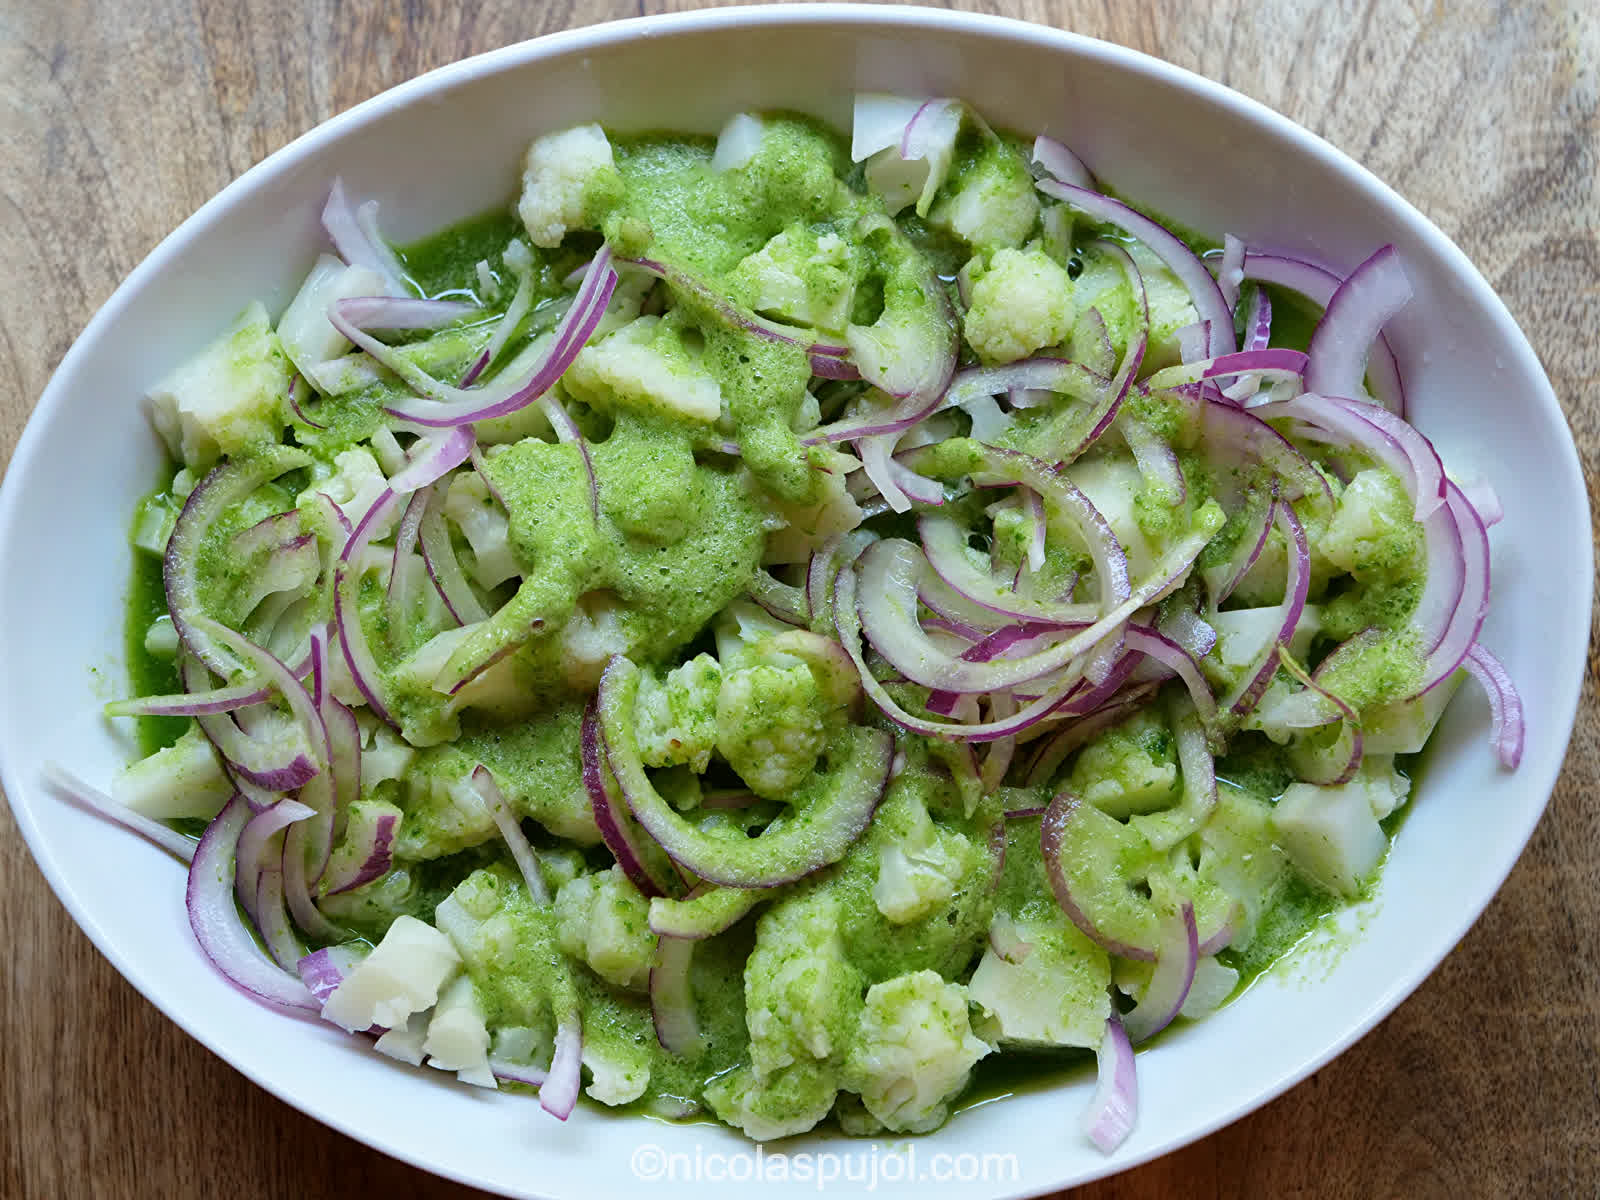 Mix the aguachile sauce with cauliflower and onions.